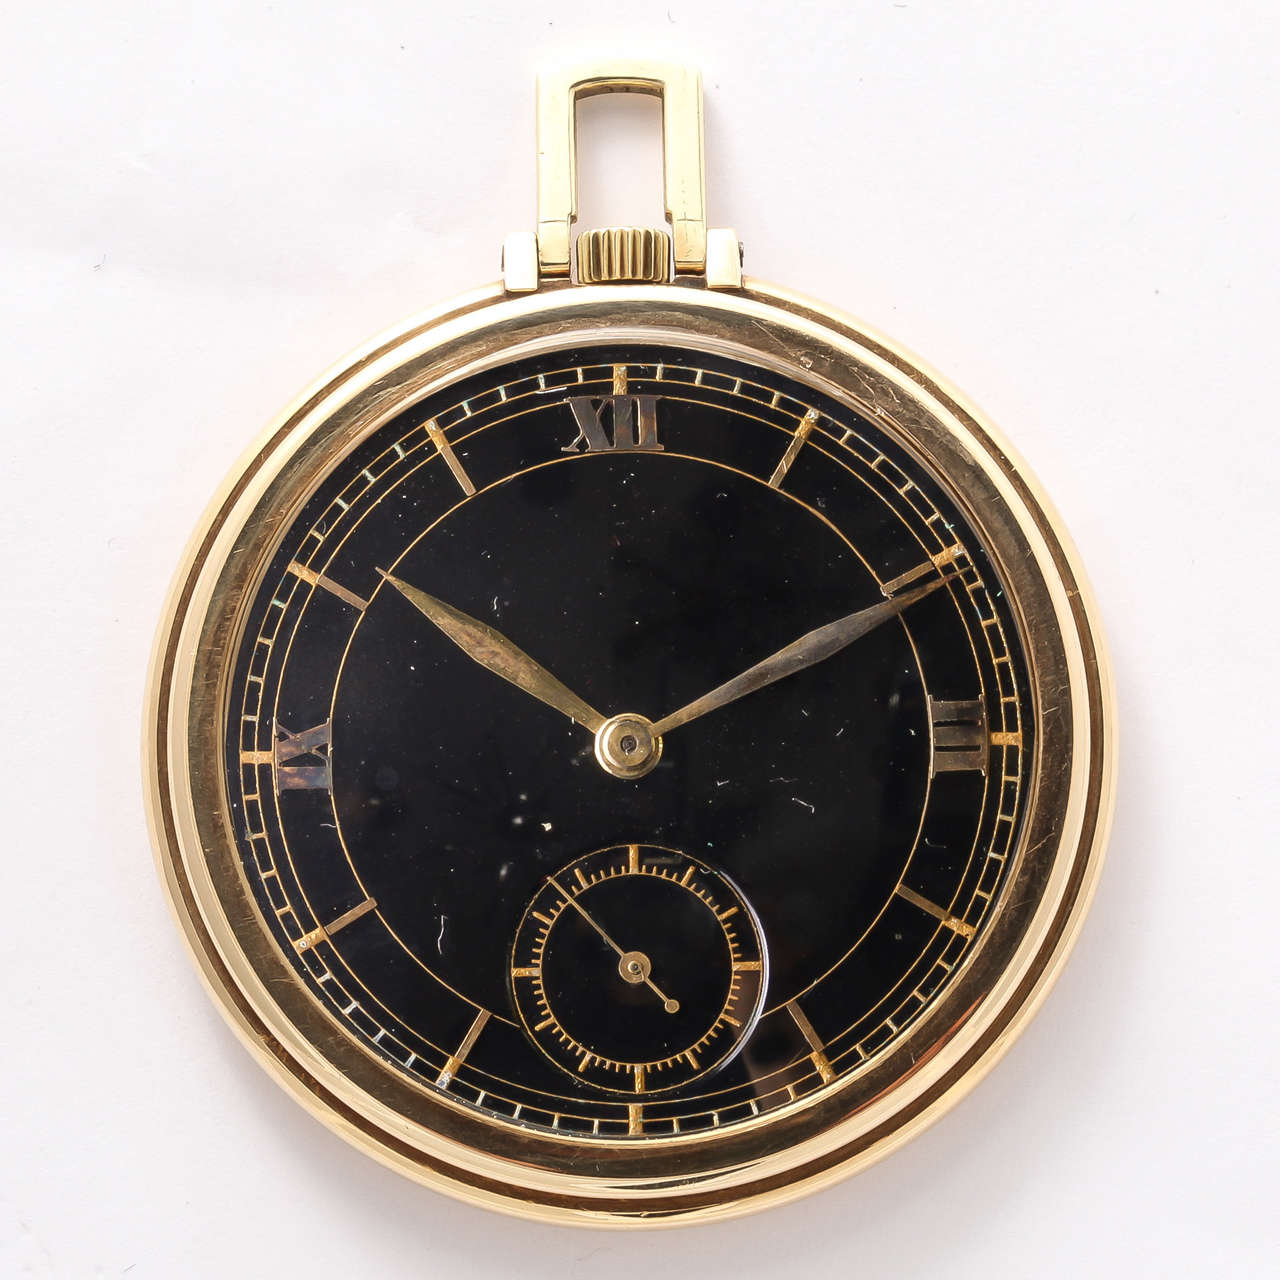 Jaeger-LeCoultre 18k Yellow Gold Pocket Watch with Black Dial with Roman Numerals. Subsidiary seconds. Circa 1940s.